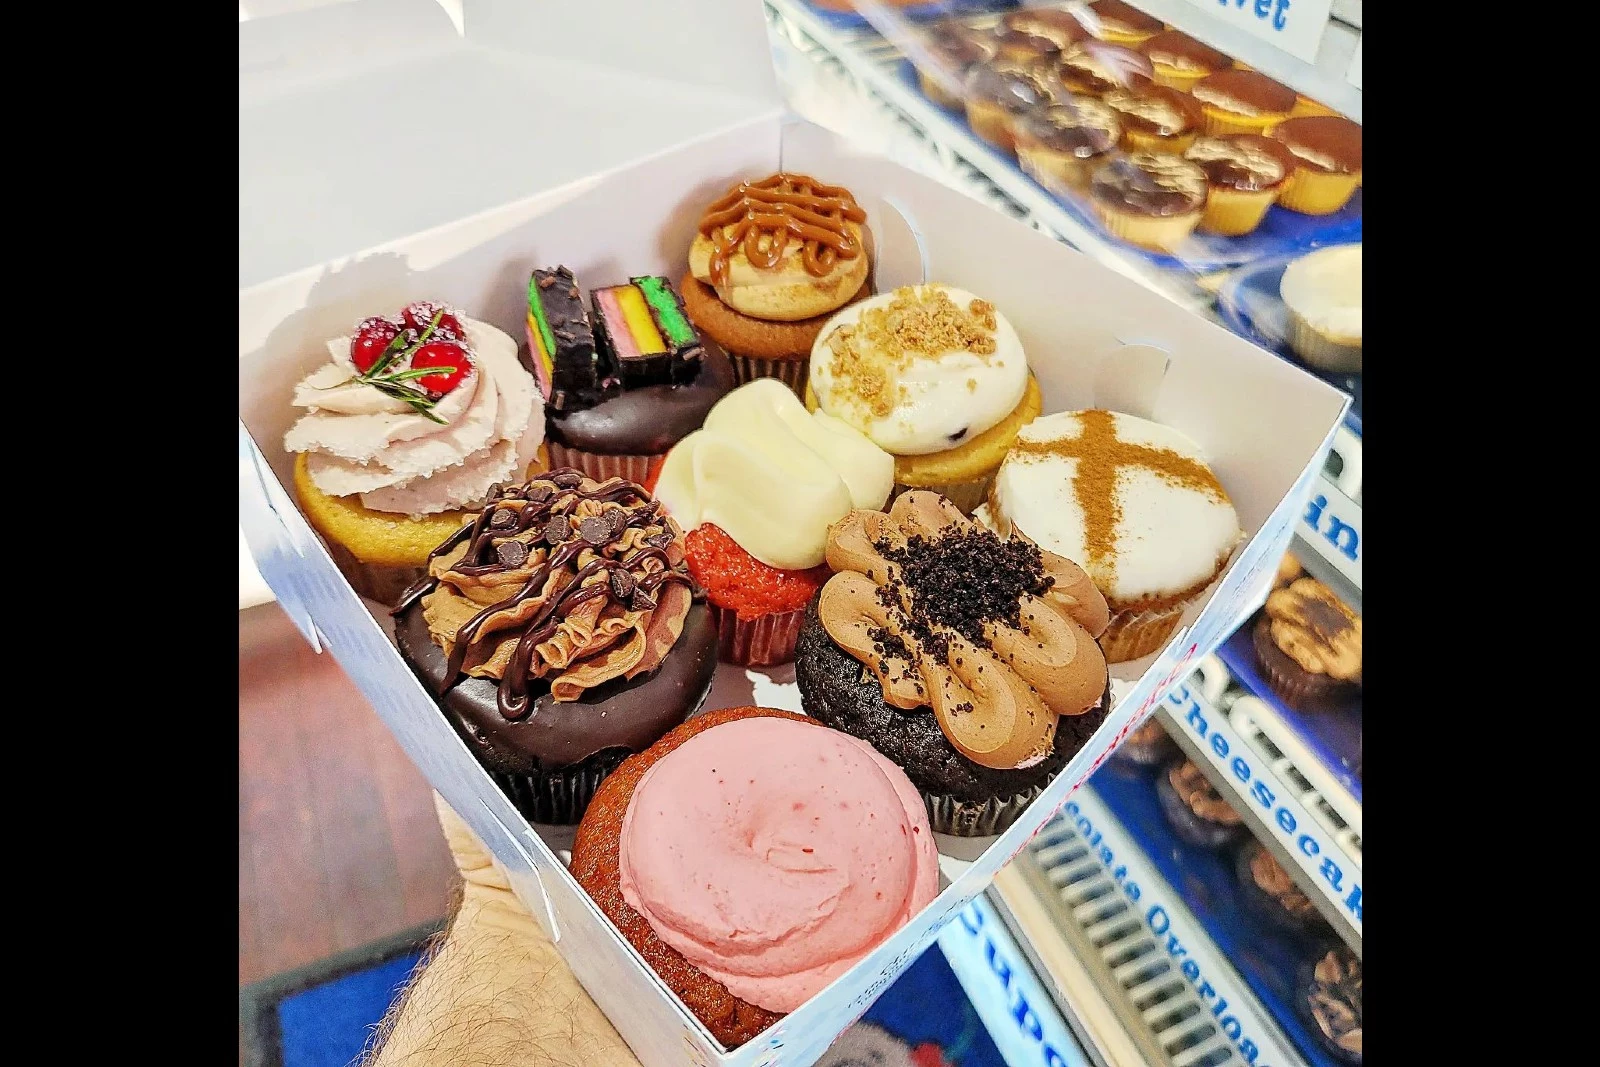 Mr. Cupcakes to open a new location in Brick